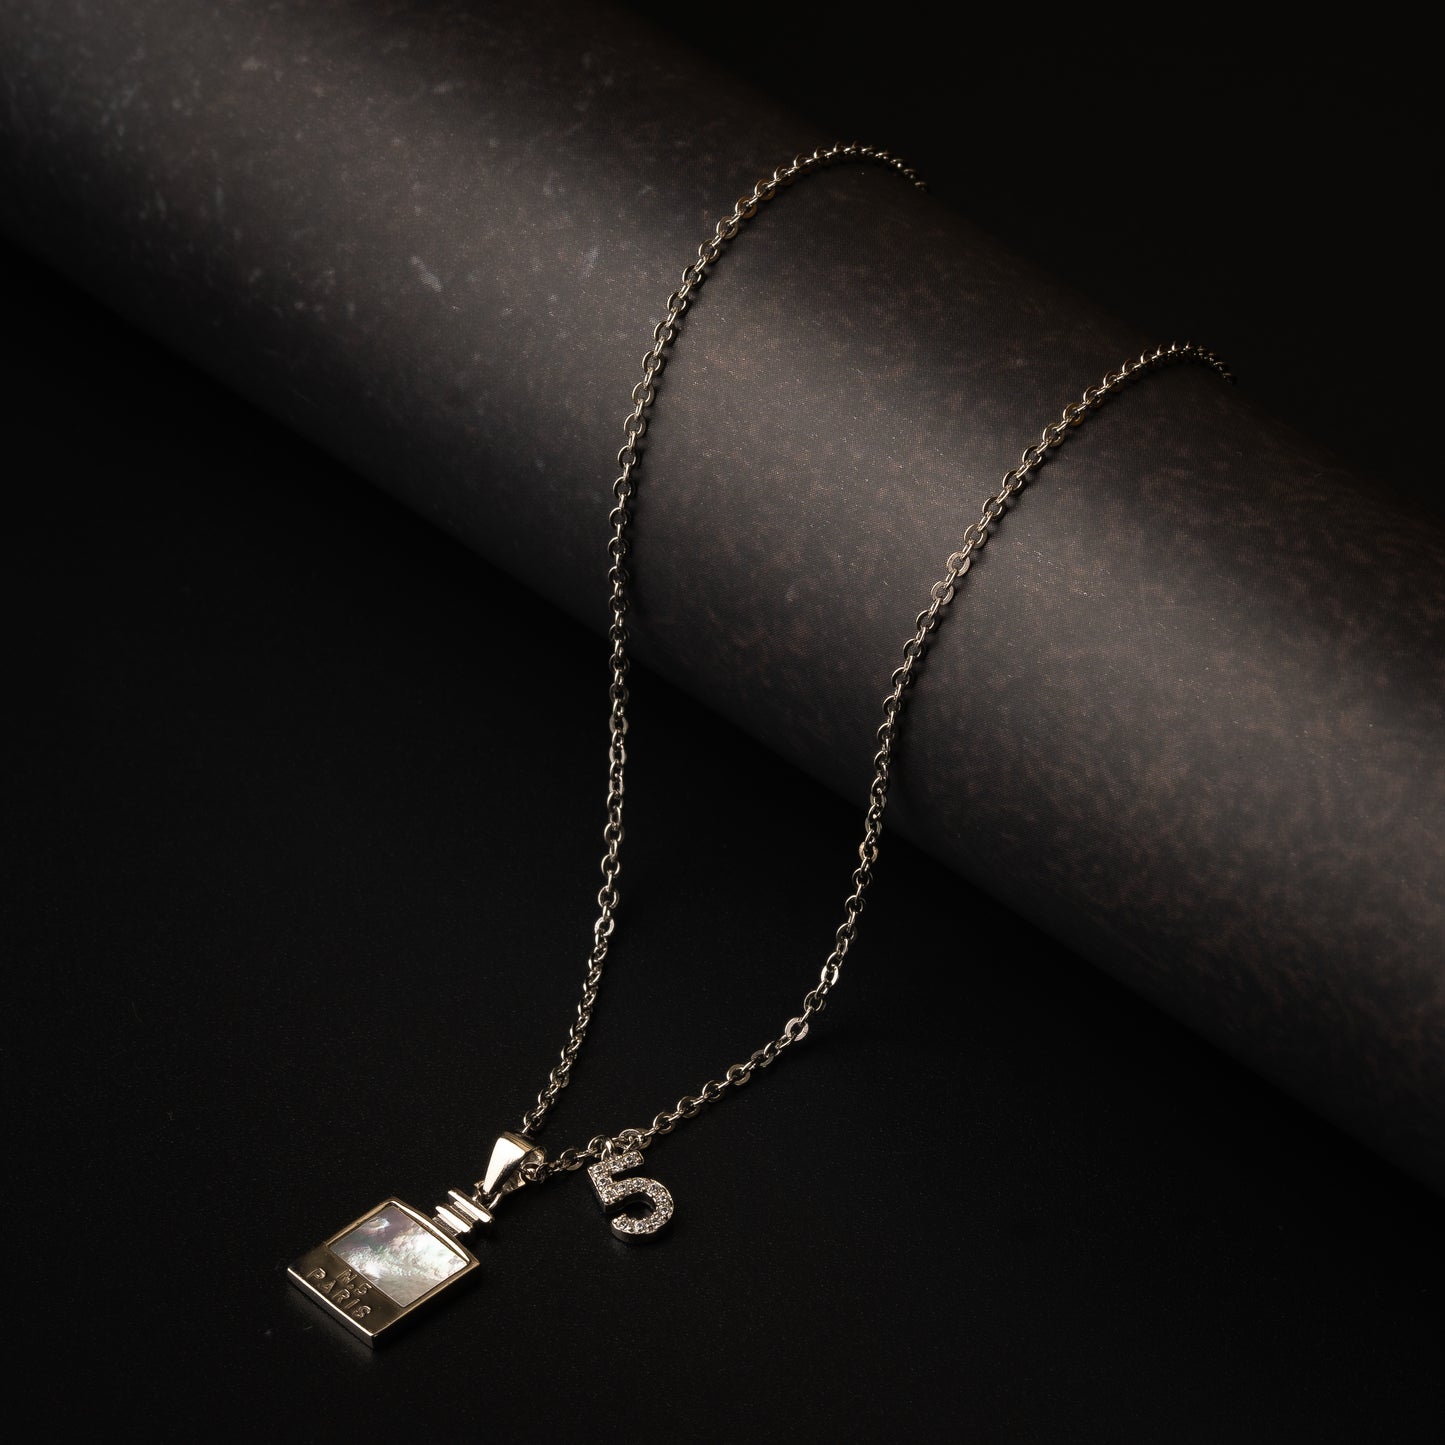 Silver TV With Charm Chain Pendant